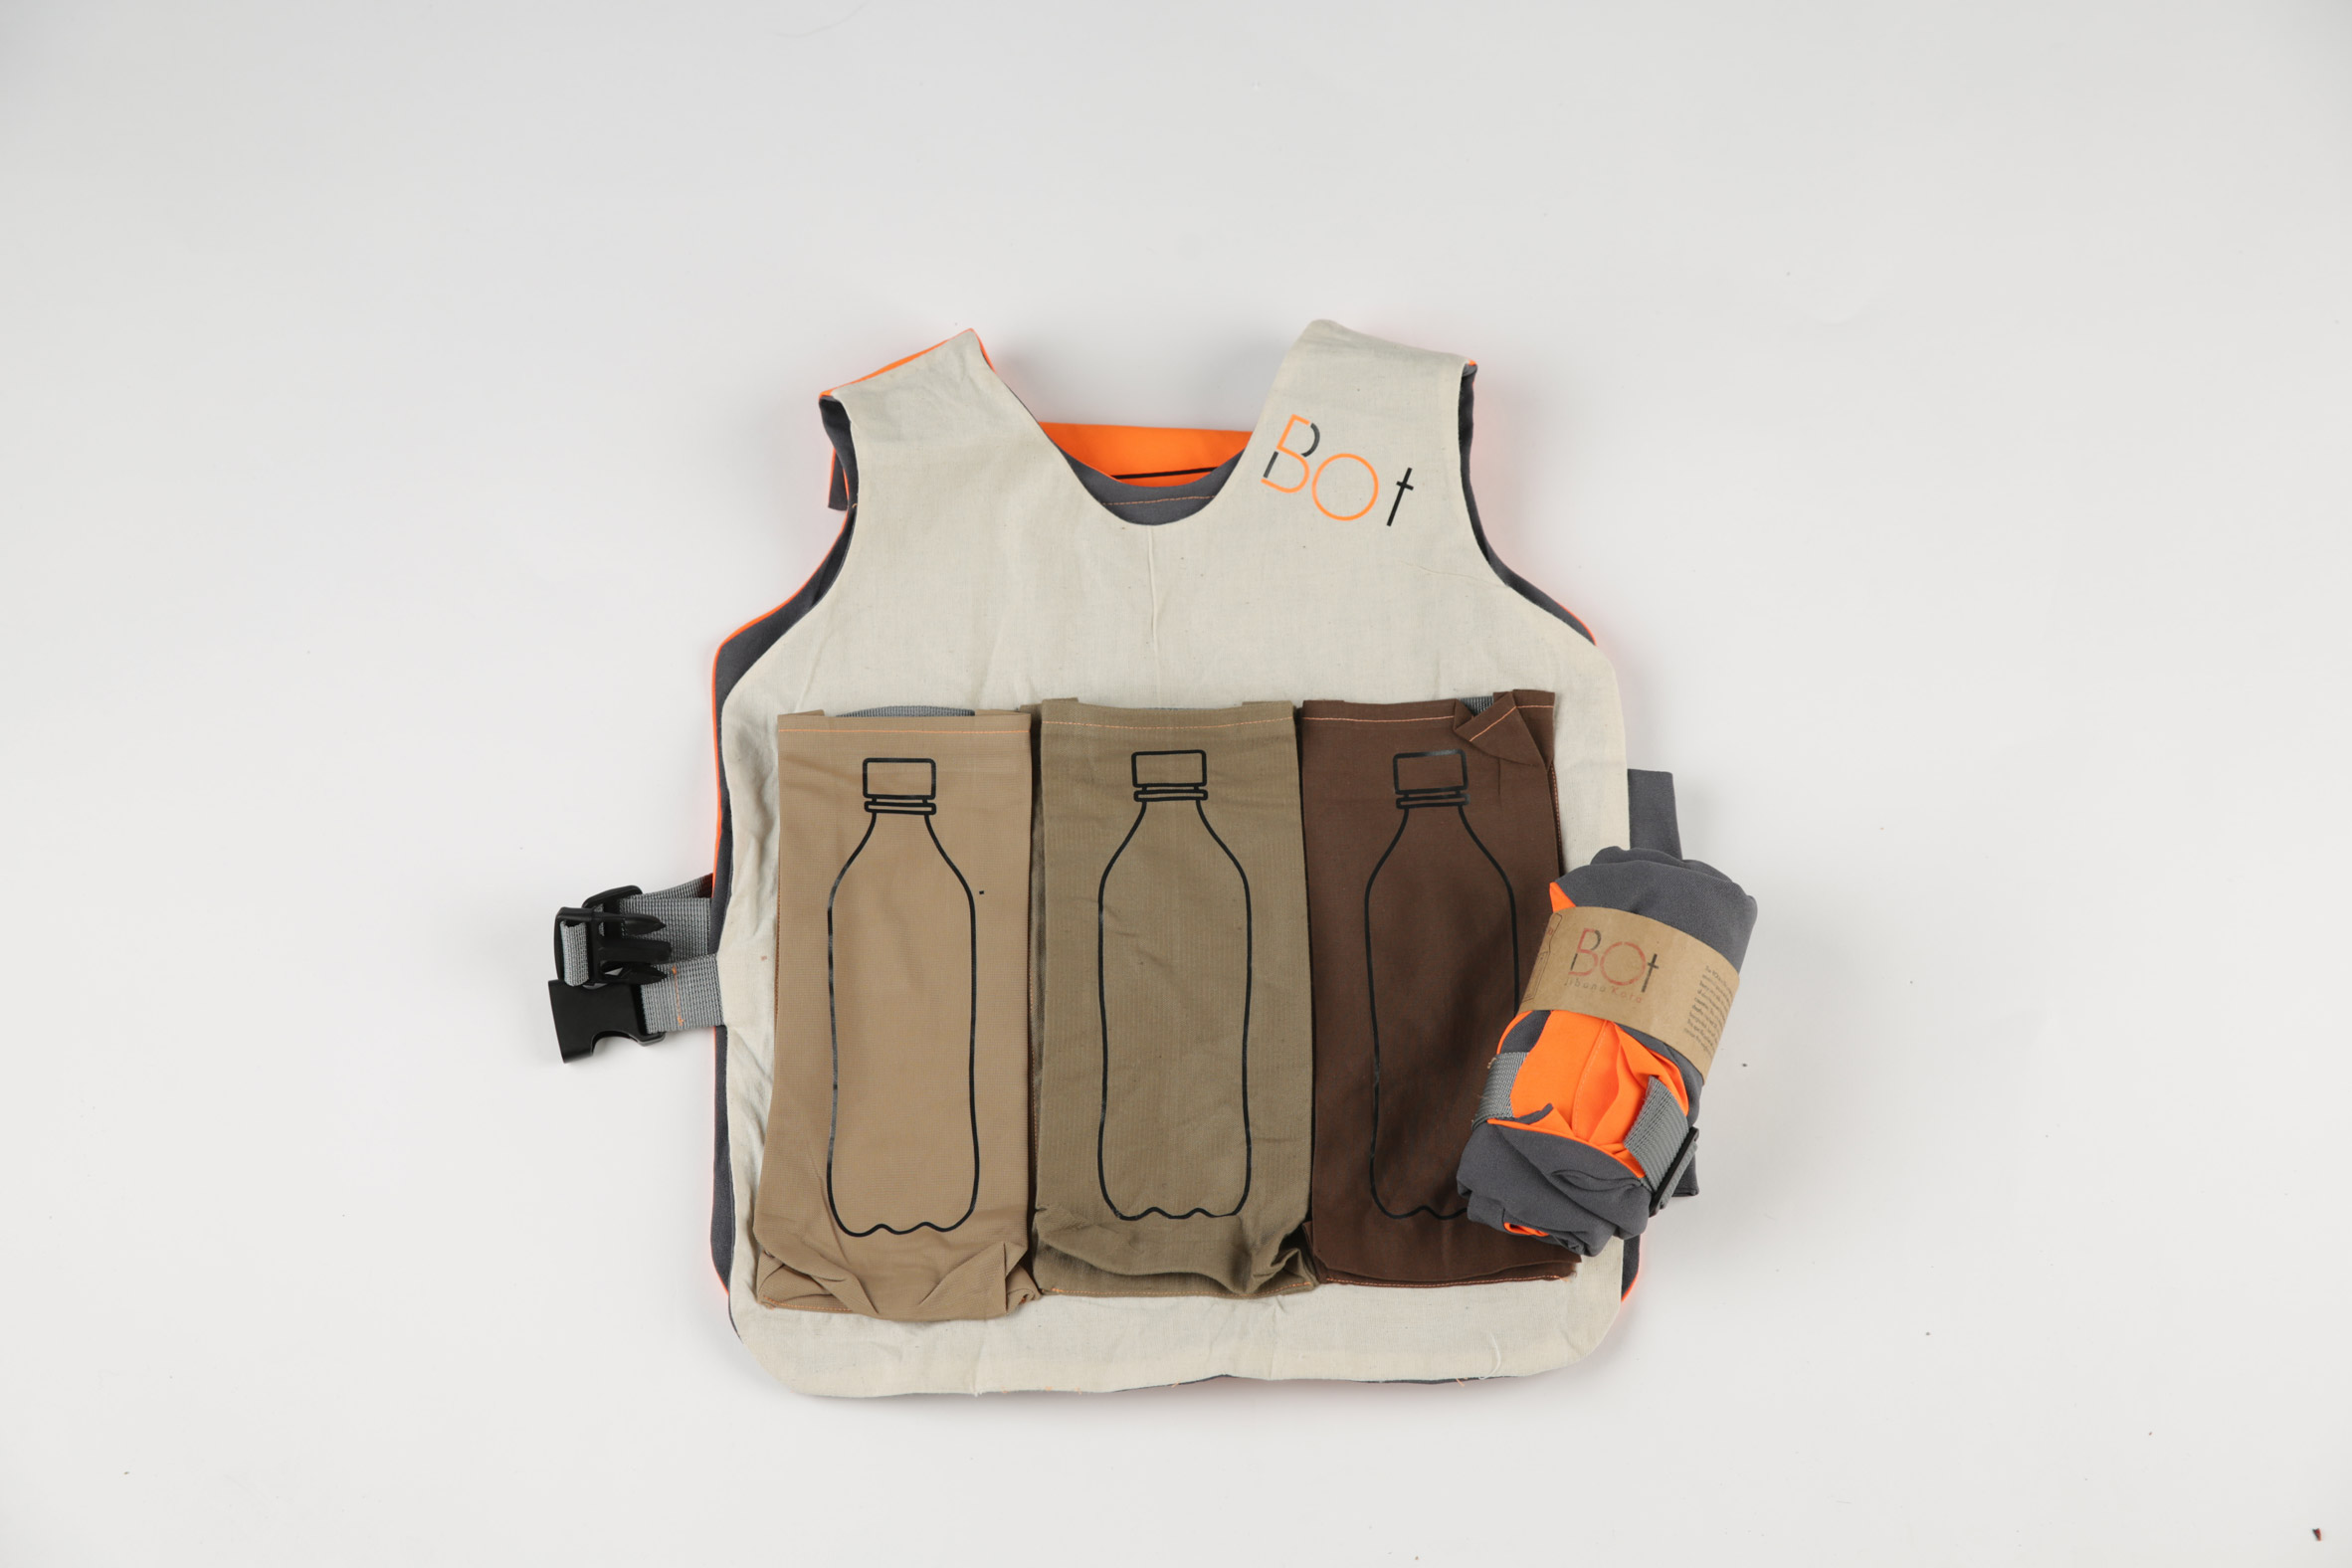 High chair and life jacket vest, SAVE 27% 